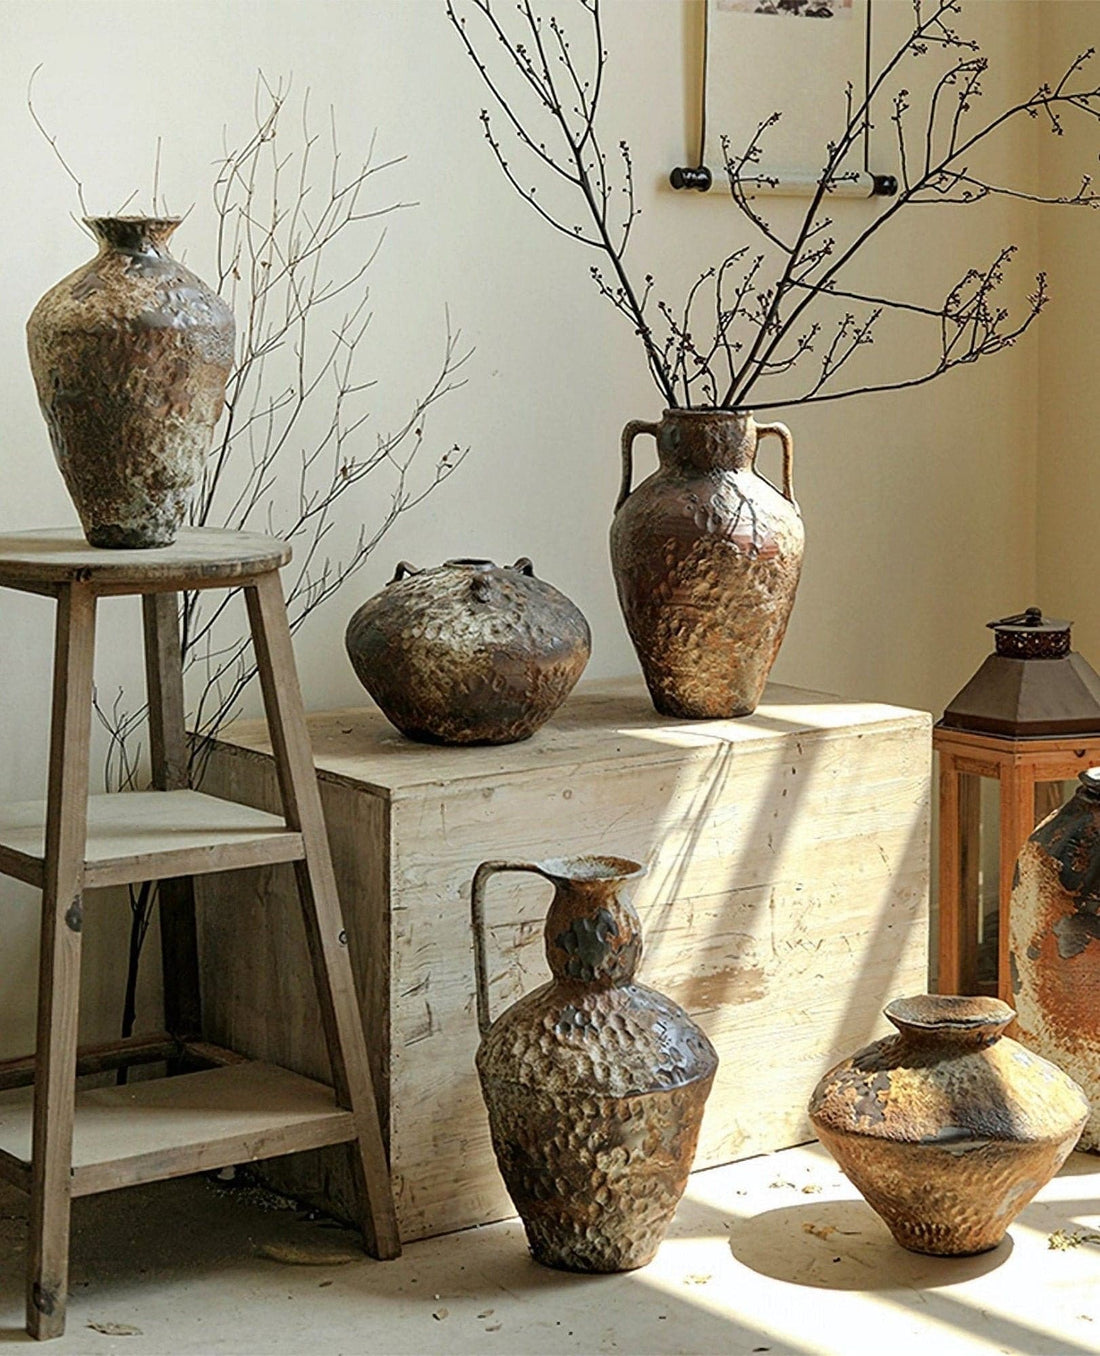 Best Ceramics For Home Decor: Types, Qualities, and Uses